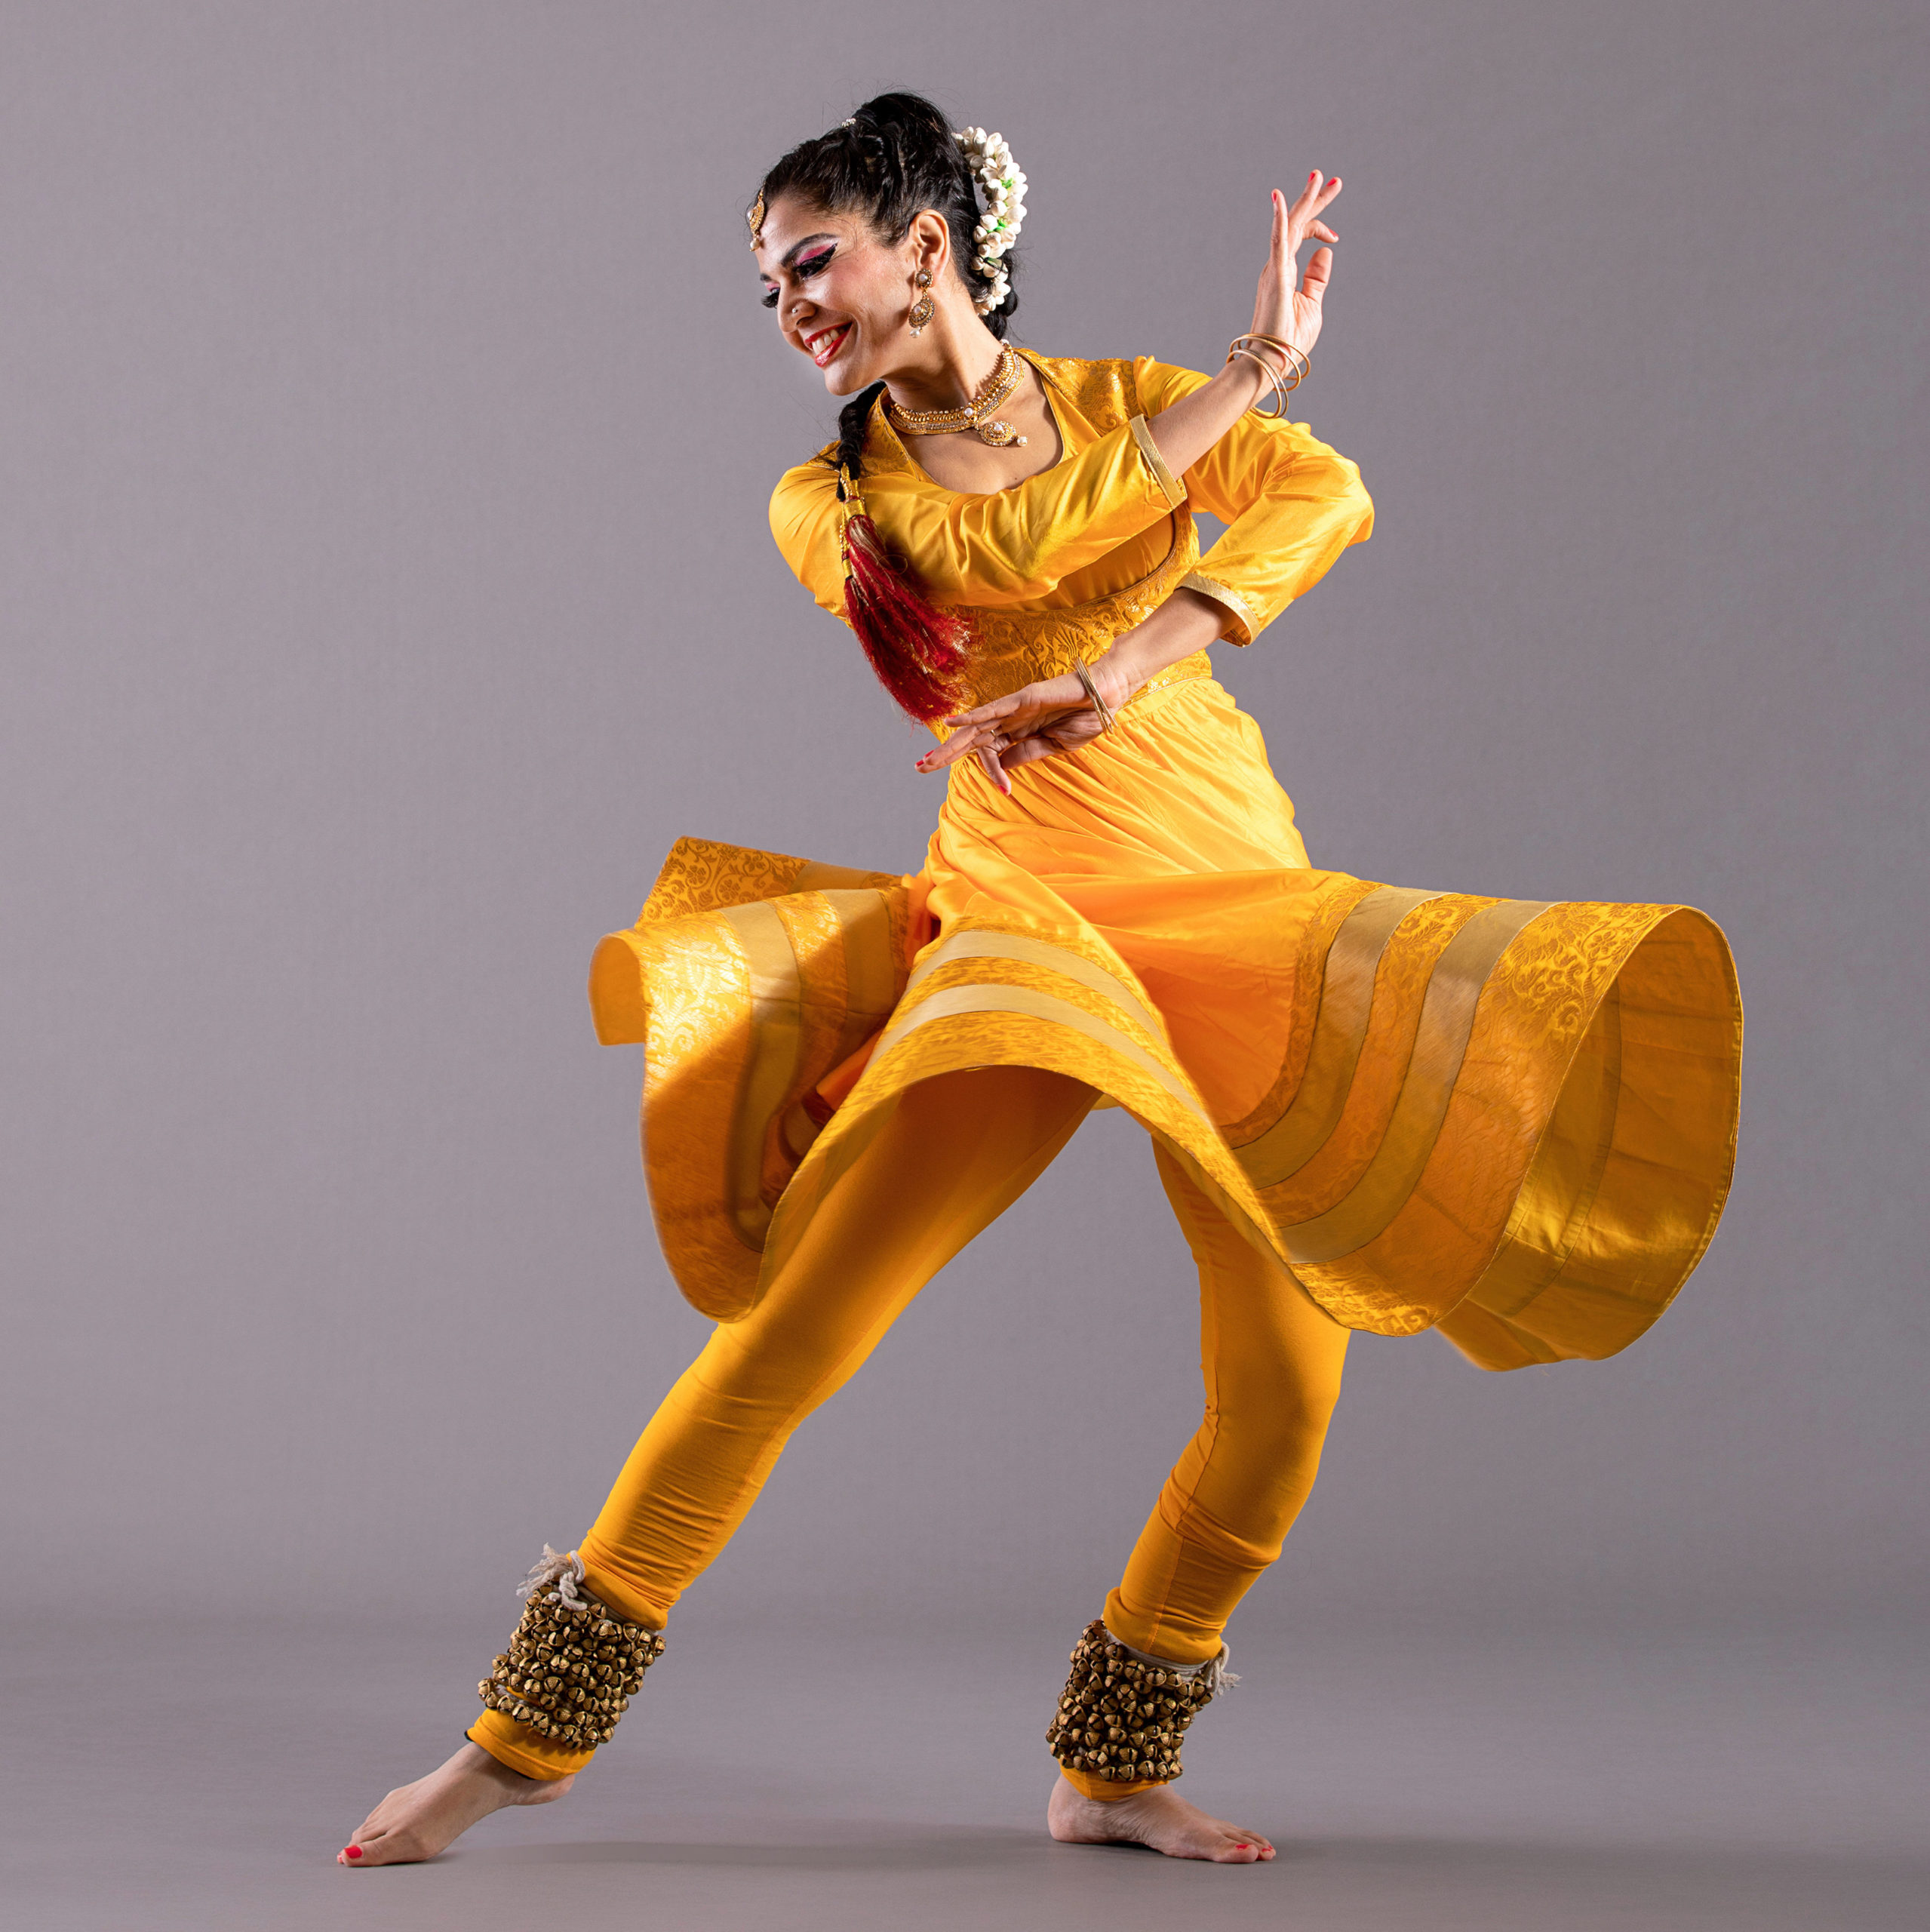 dancer lunging to right arms crossed wearing yellow dress and pants